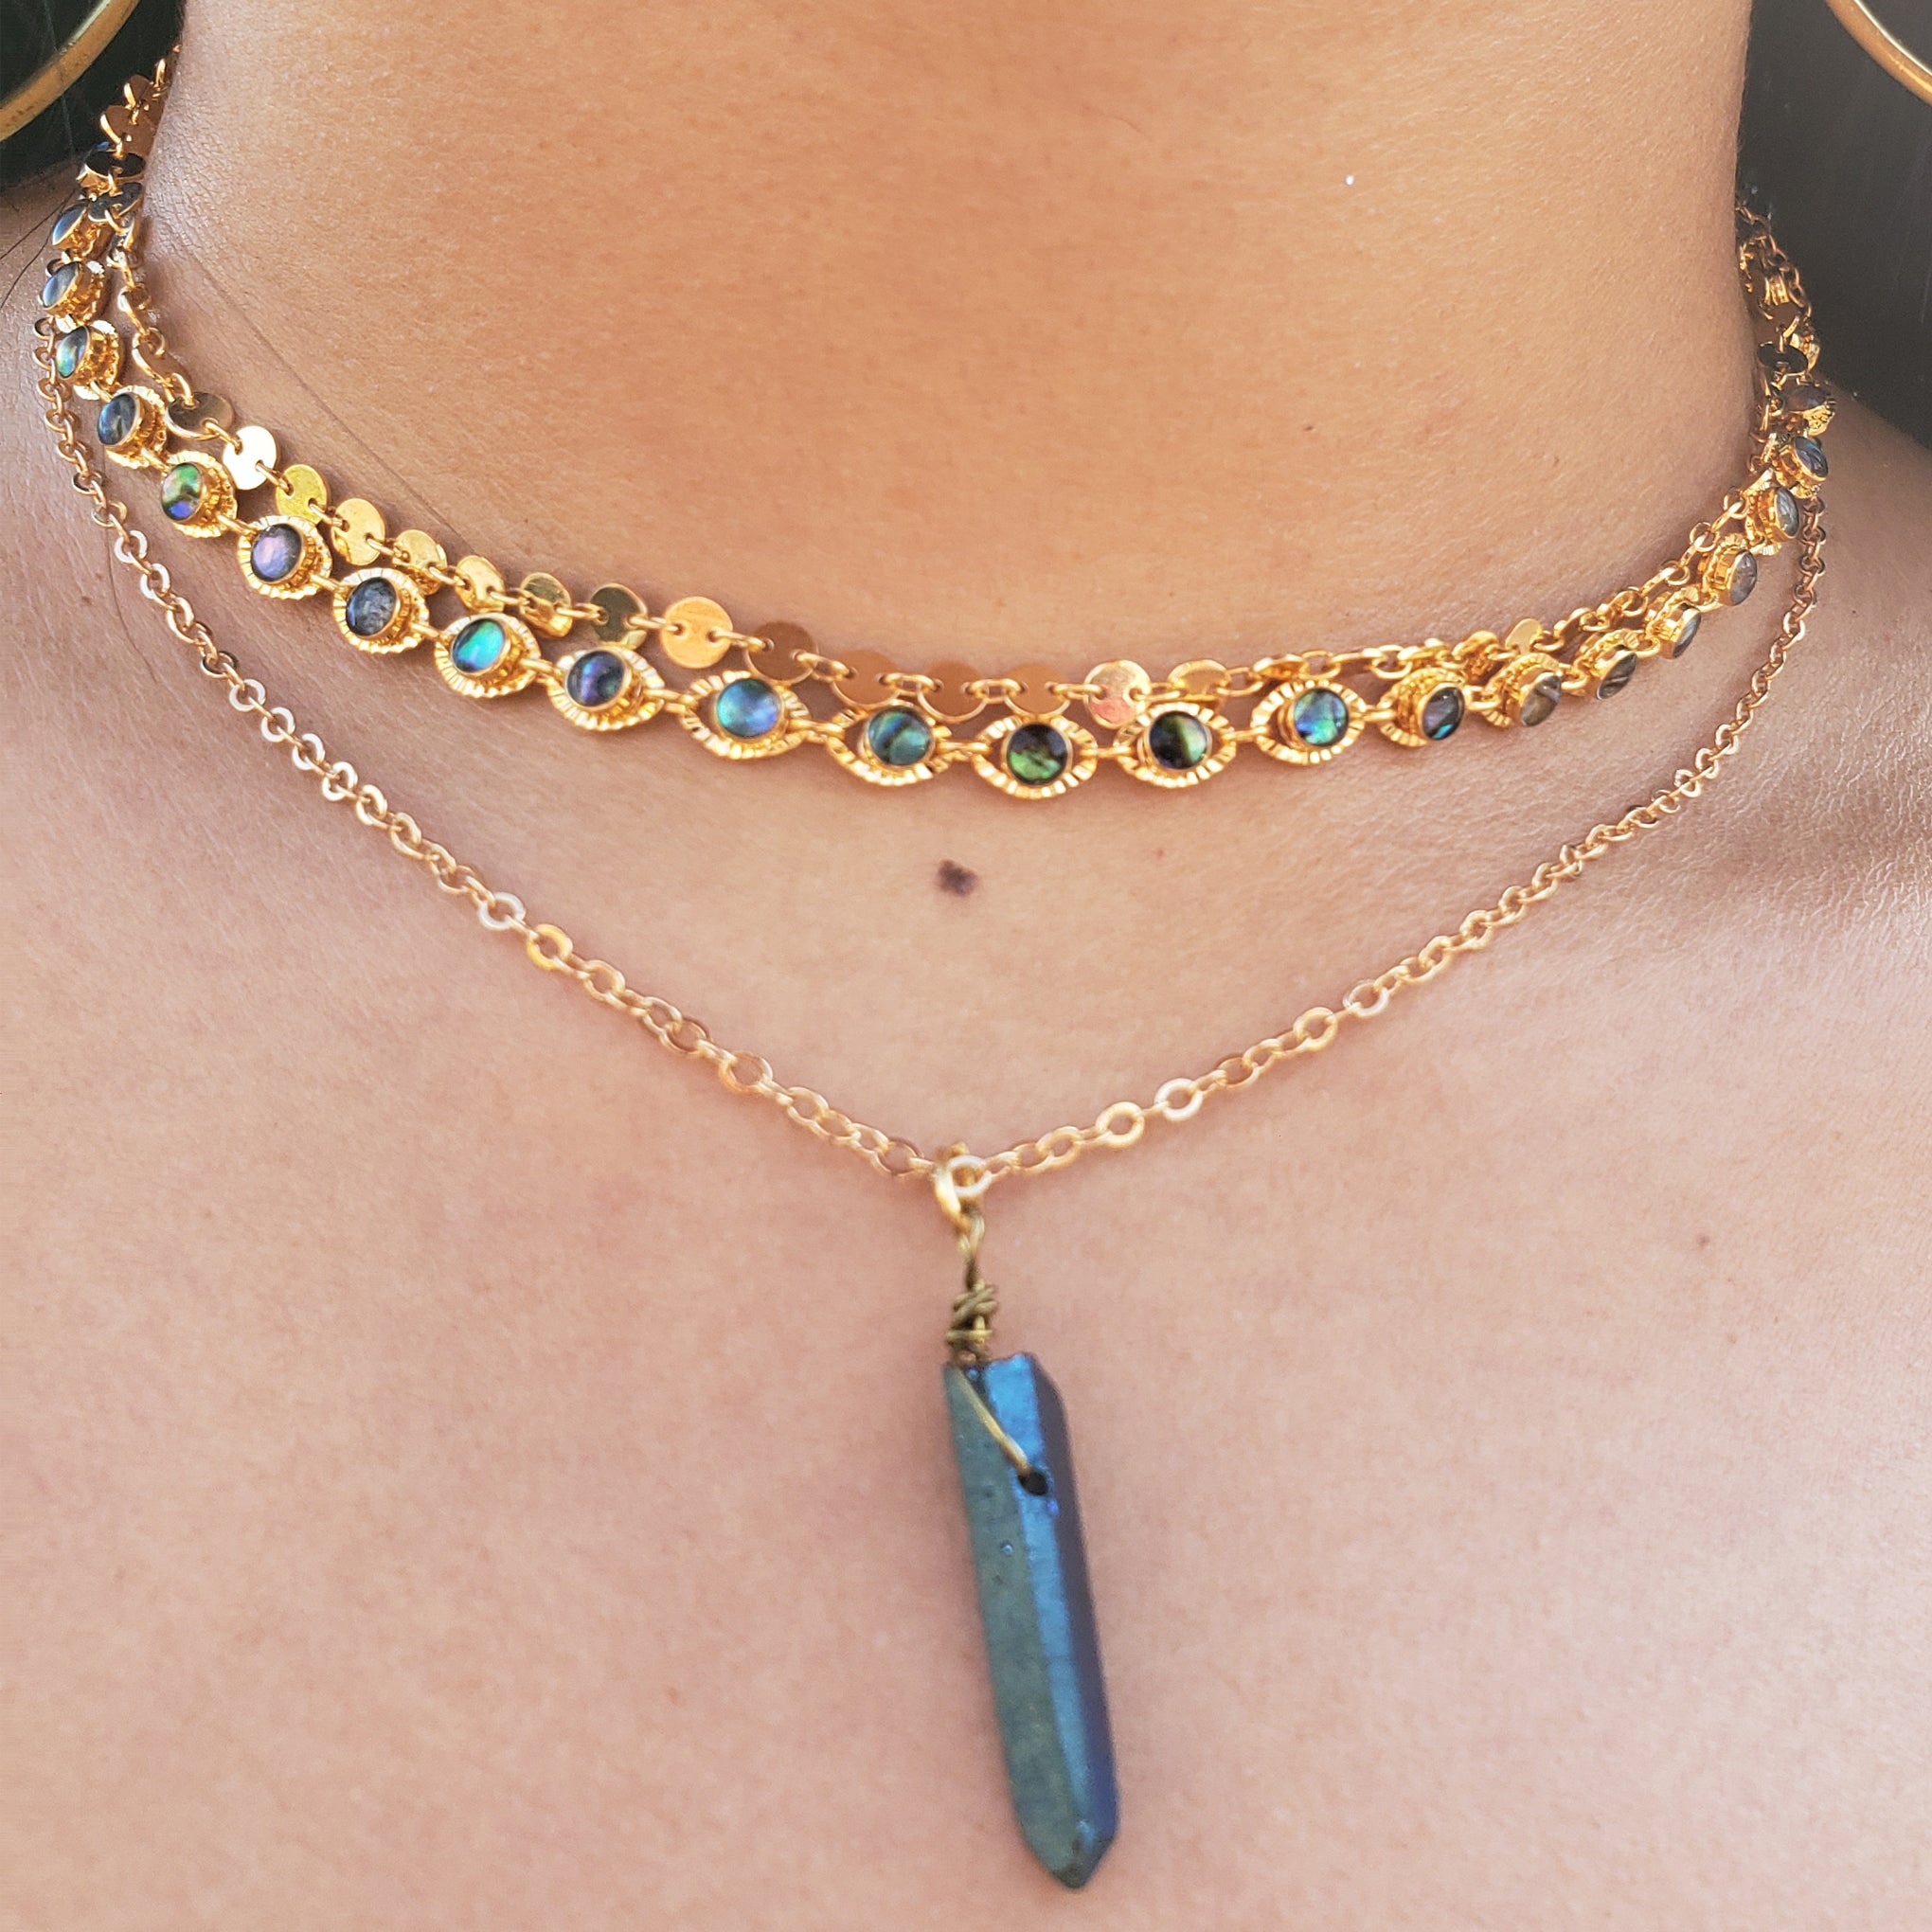 Bluest Aqua Crystal Quartz 18KT and 16KT Choker Baddest Bish Ever Fine Jewelry from Dreamy Dreams Catcher Collection